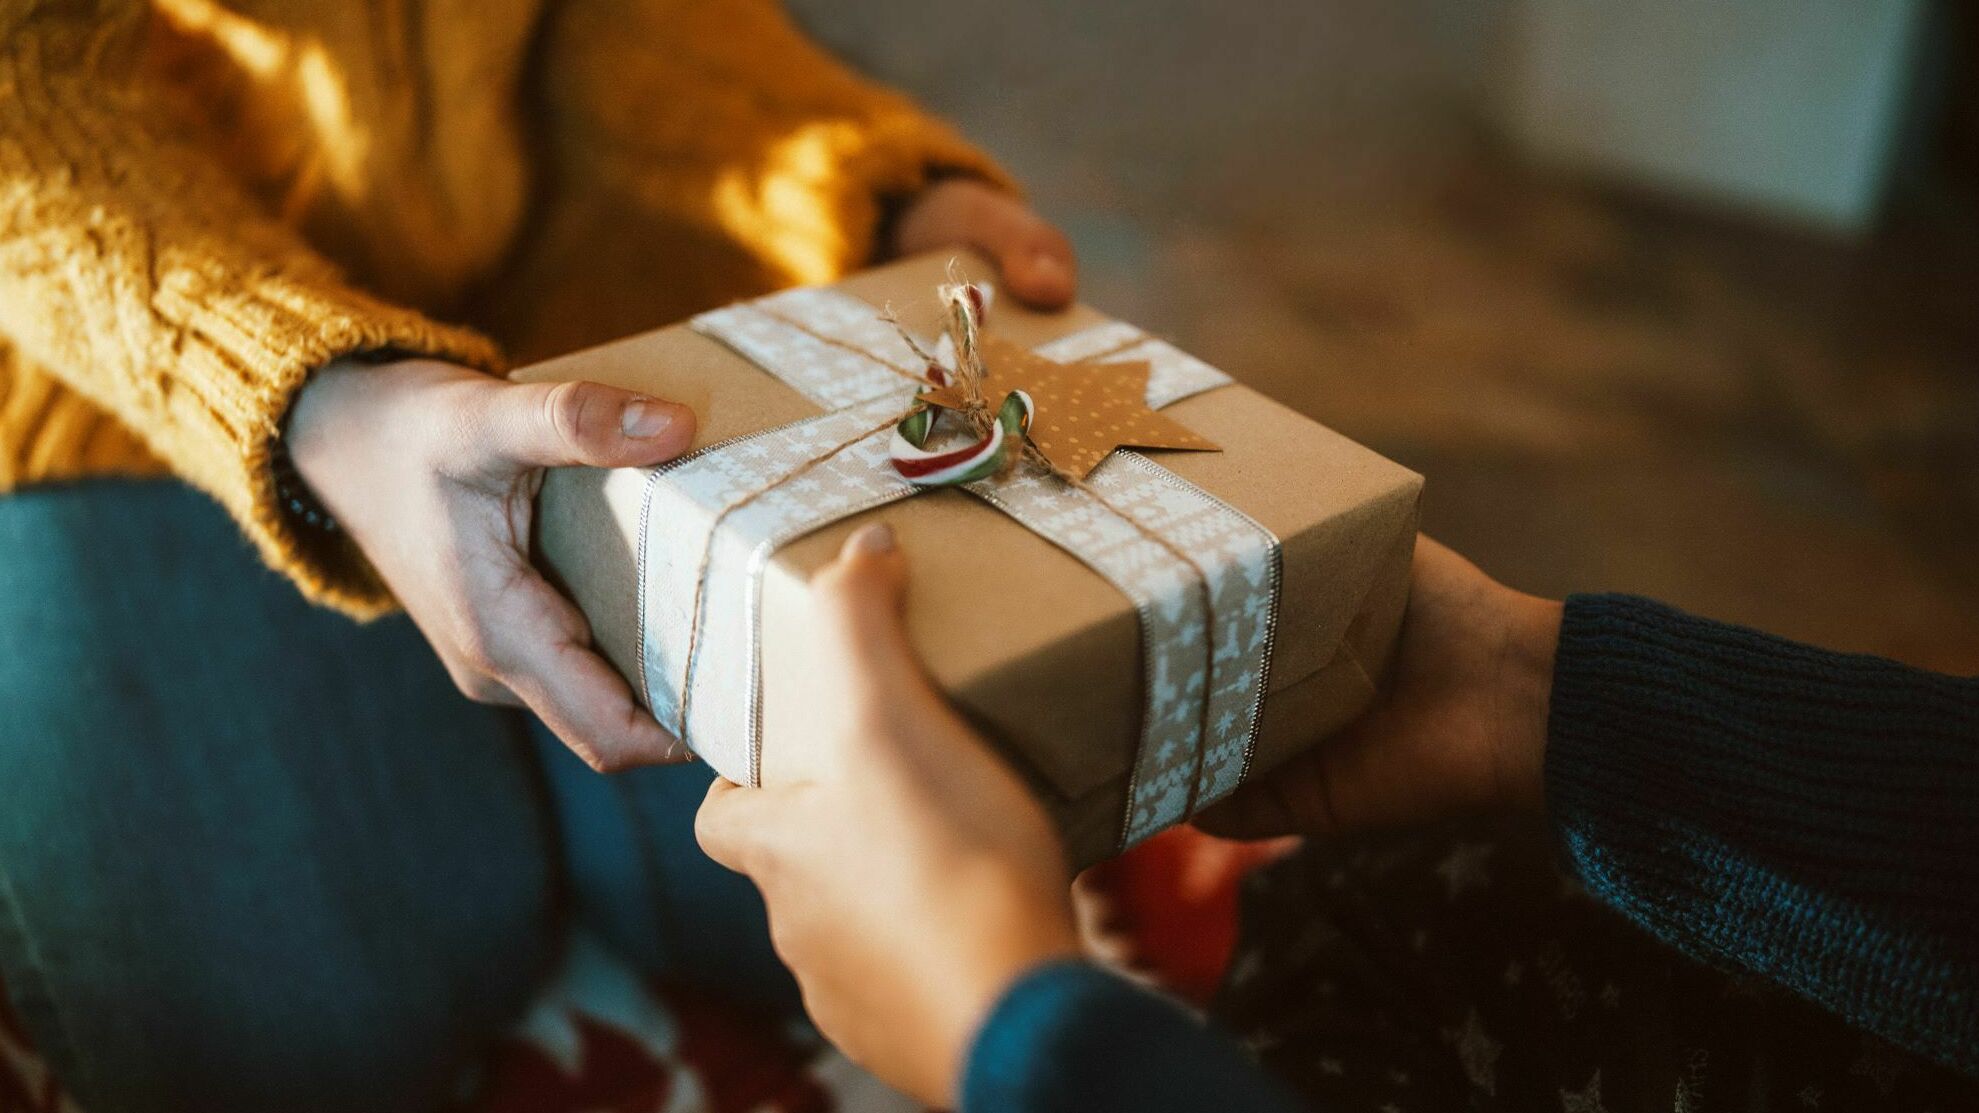 Giving gifts boosts happiness, research shows. So why do we feel frazzled?